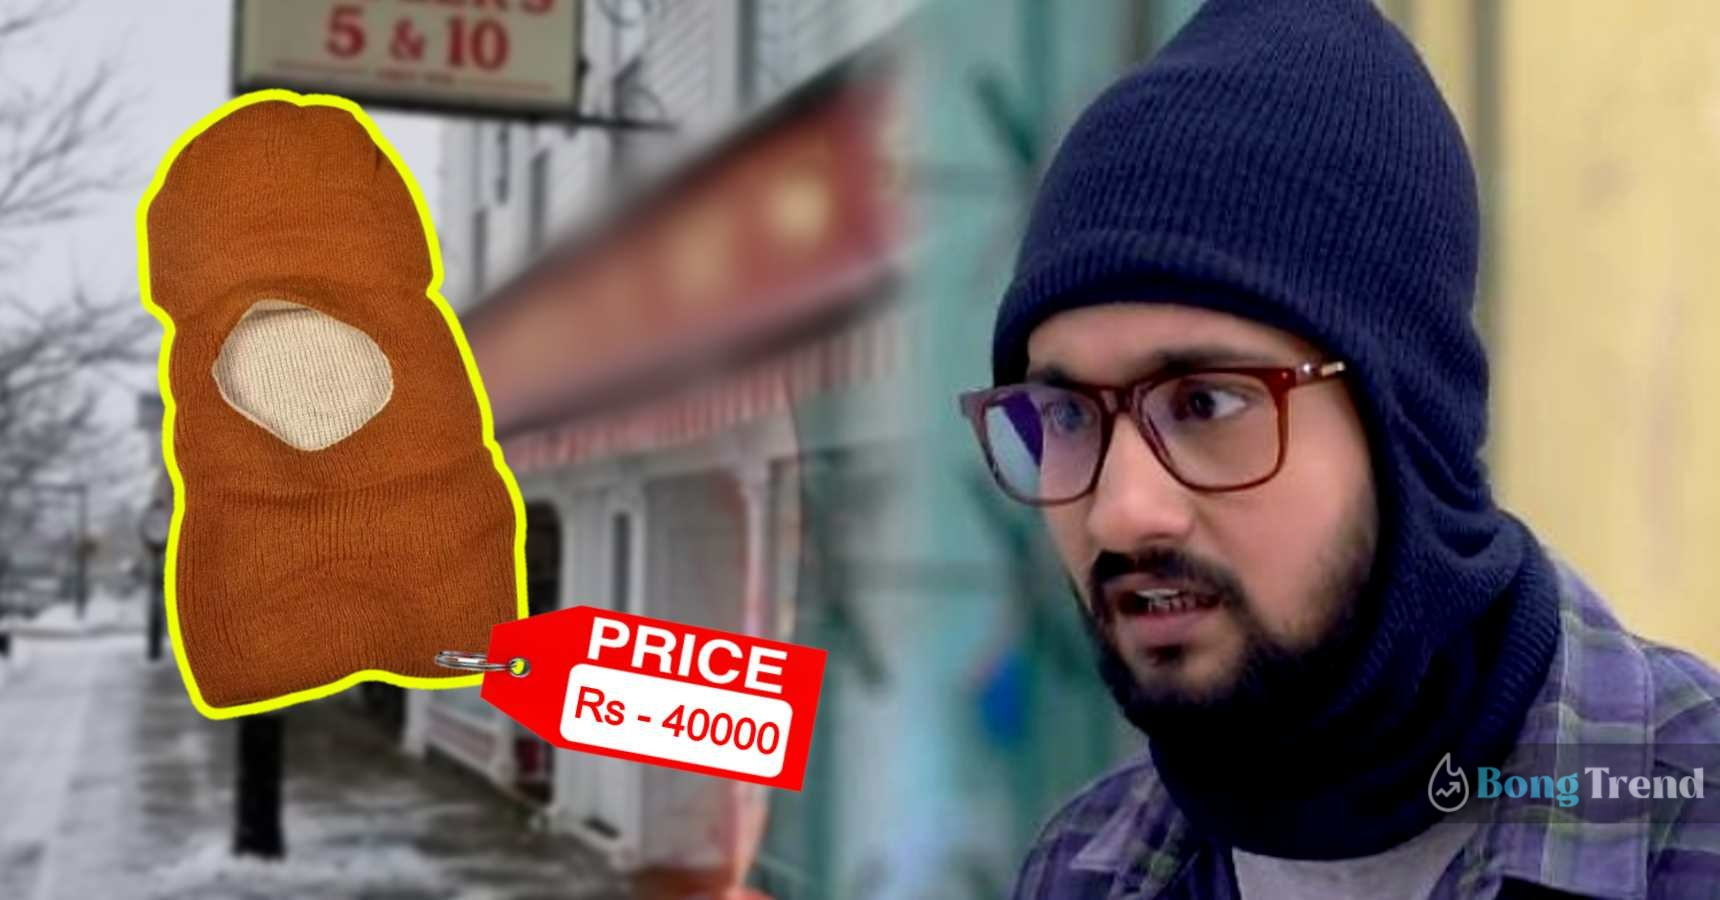 Luxury Fashion Brand sell Monkey Cap for Rs 40000 goes viral on social media